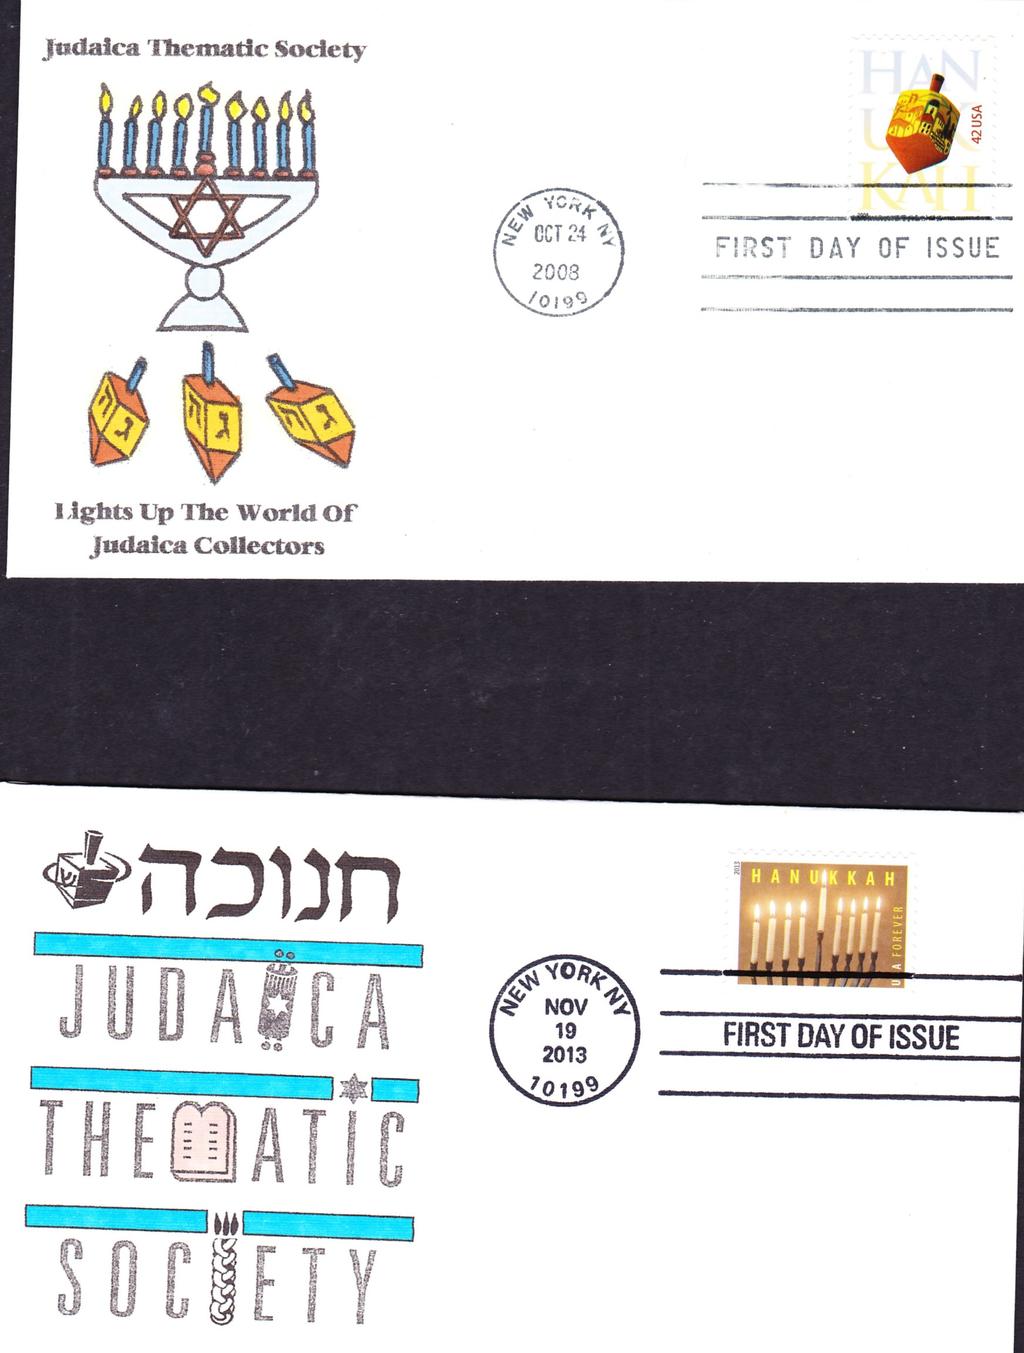 Judaica Thematic Society Hanukkah First Day Covers:- One of 2008 and 2013 are still available. Please enquire if interested.